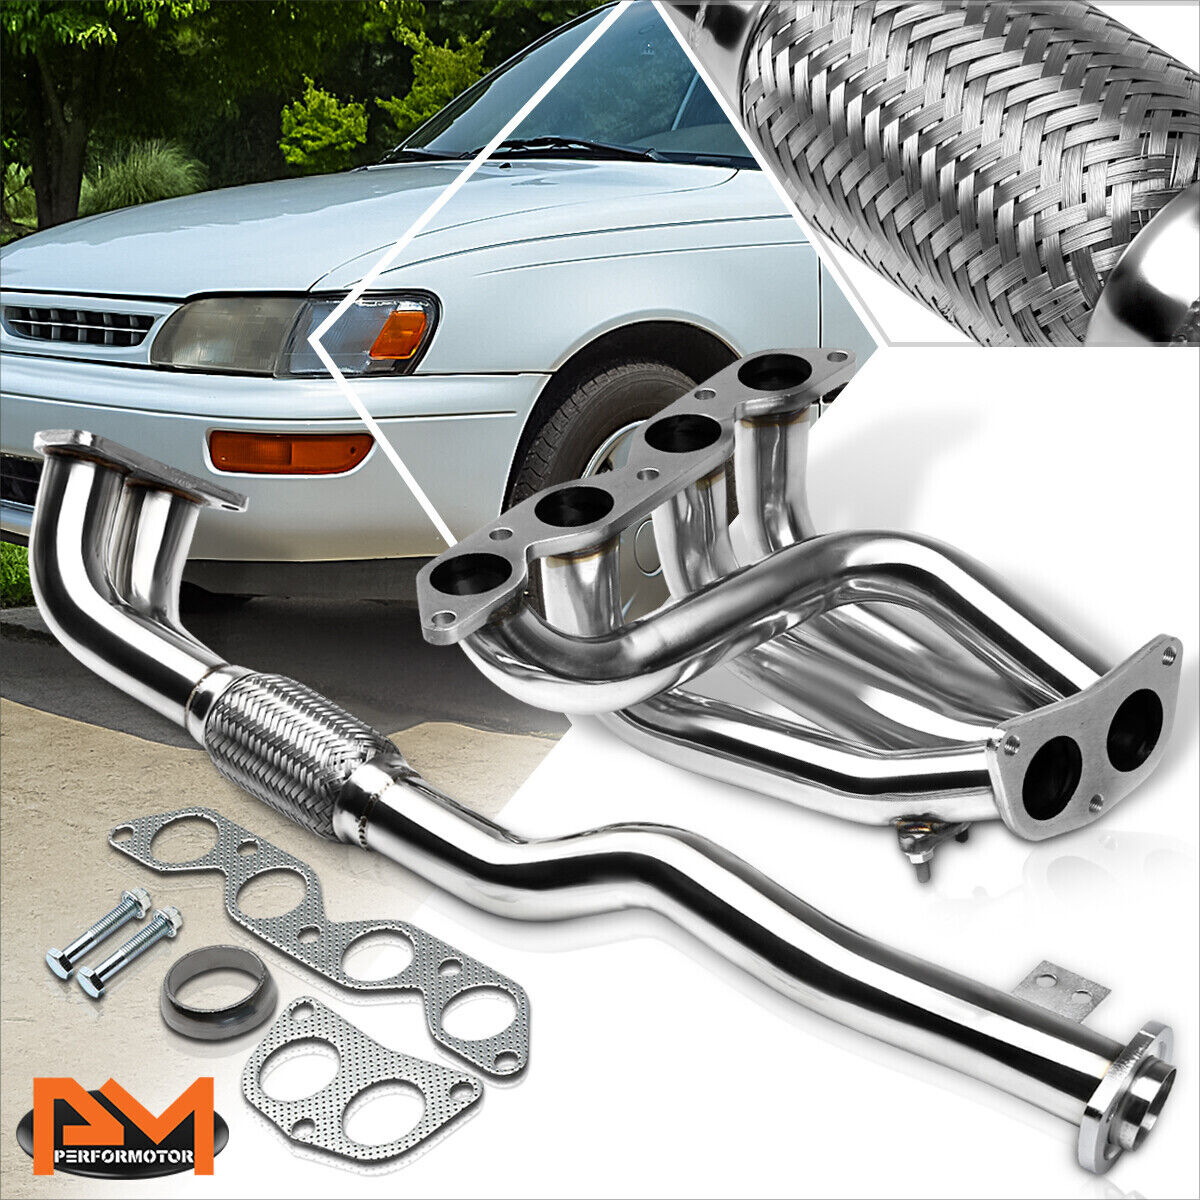 For 93-97 Corolla 1.8L DX/LE E100/AE102 S.Steel 4-2-1 Performance Exhaust Header